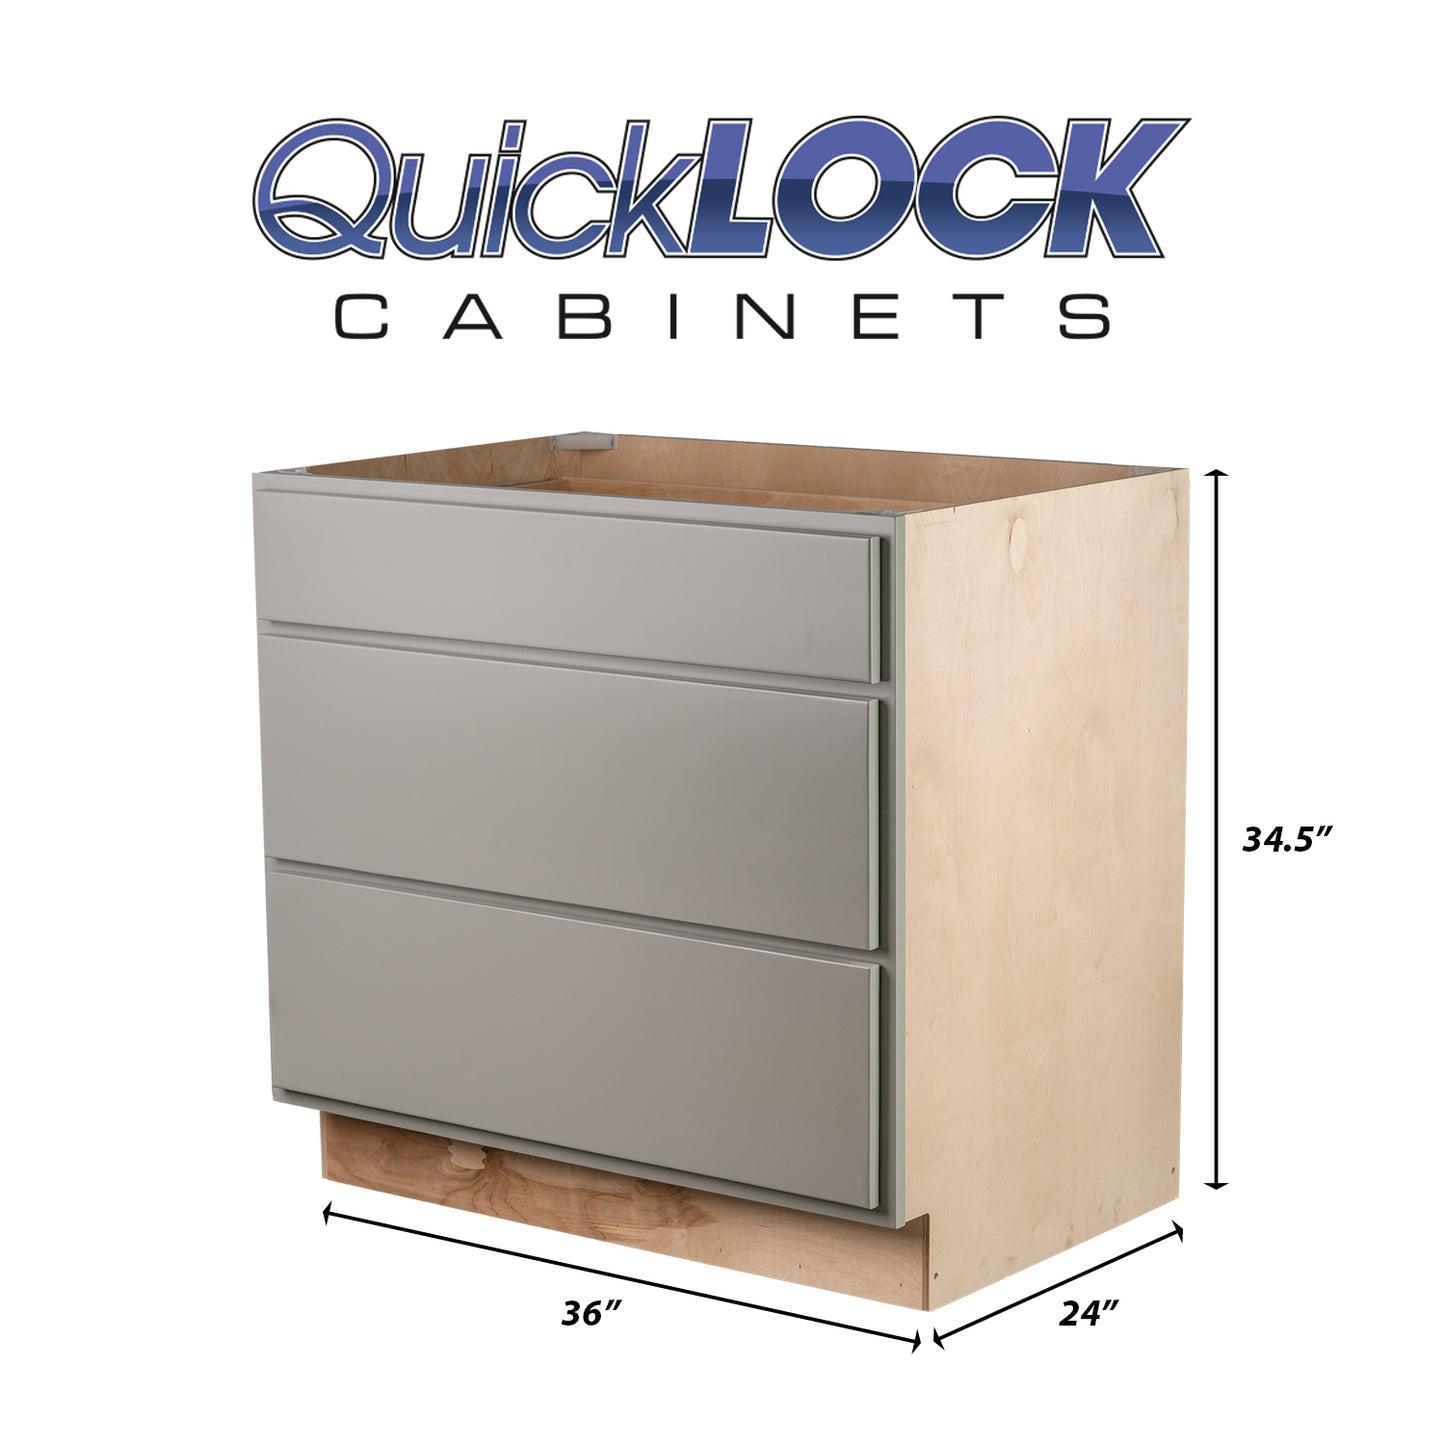 Quicklock RTA (Ready-to-Assemble) Magnetic Grey 3 Drawer 36" Pots and Pans Base Cabinet | 36"Wx34.5"Hx24"D